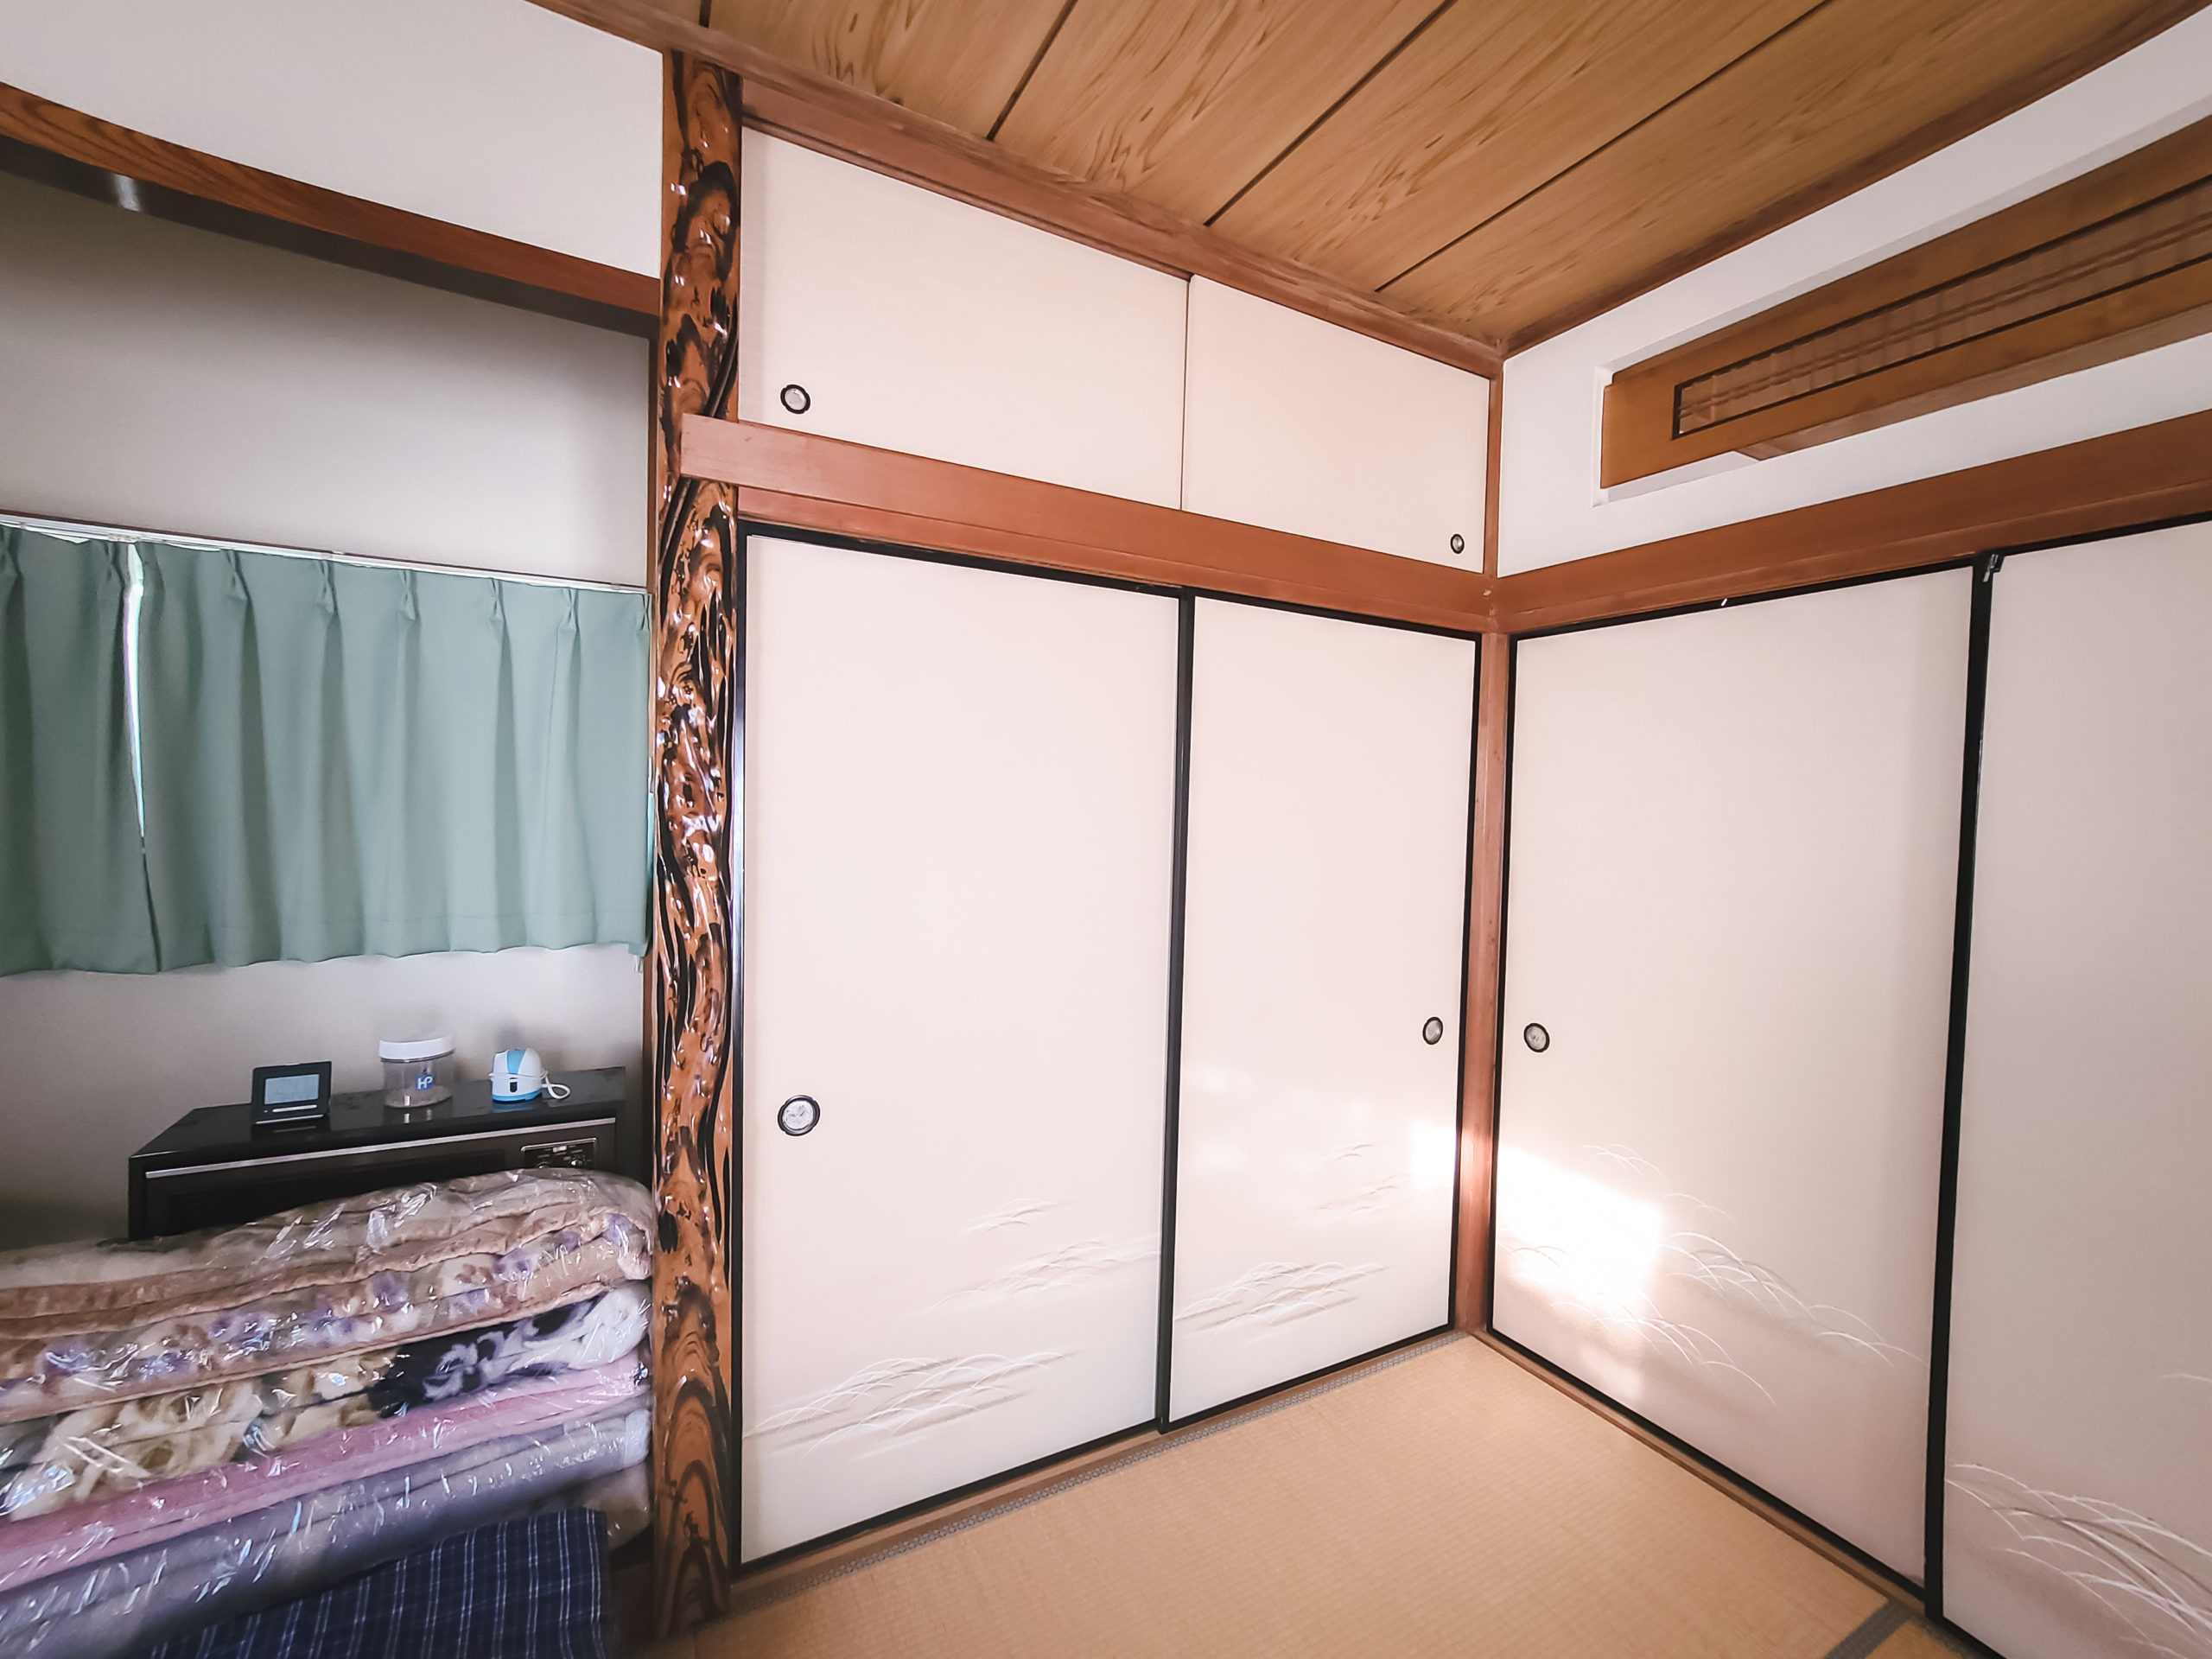 This guest-room features a very special tokobashira—the wooden pillar at the side of the alcove